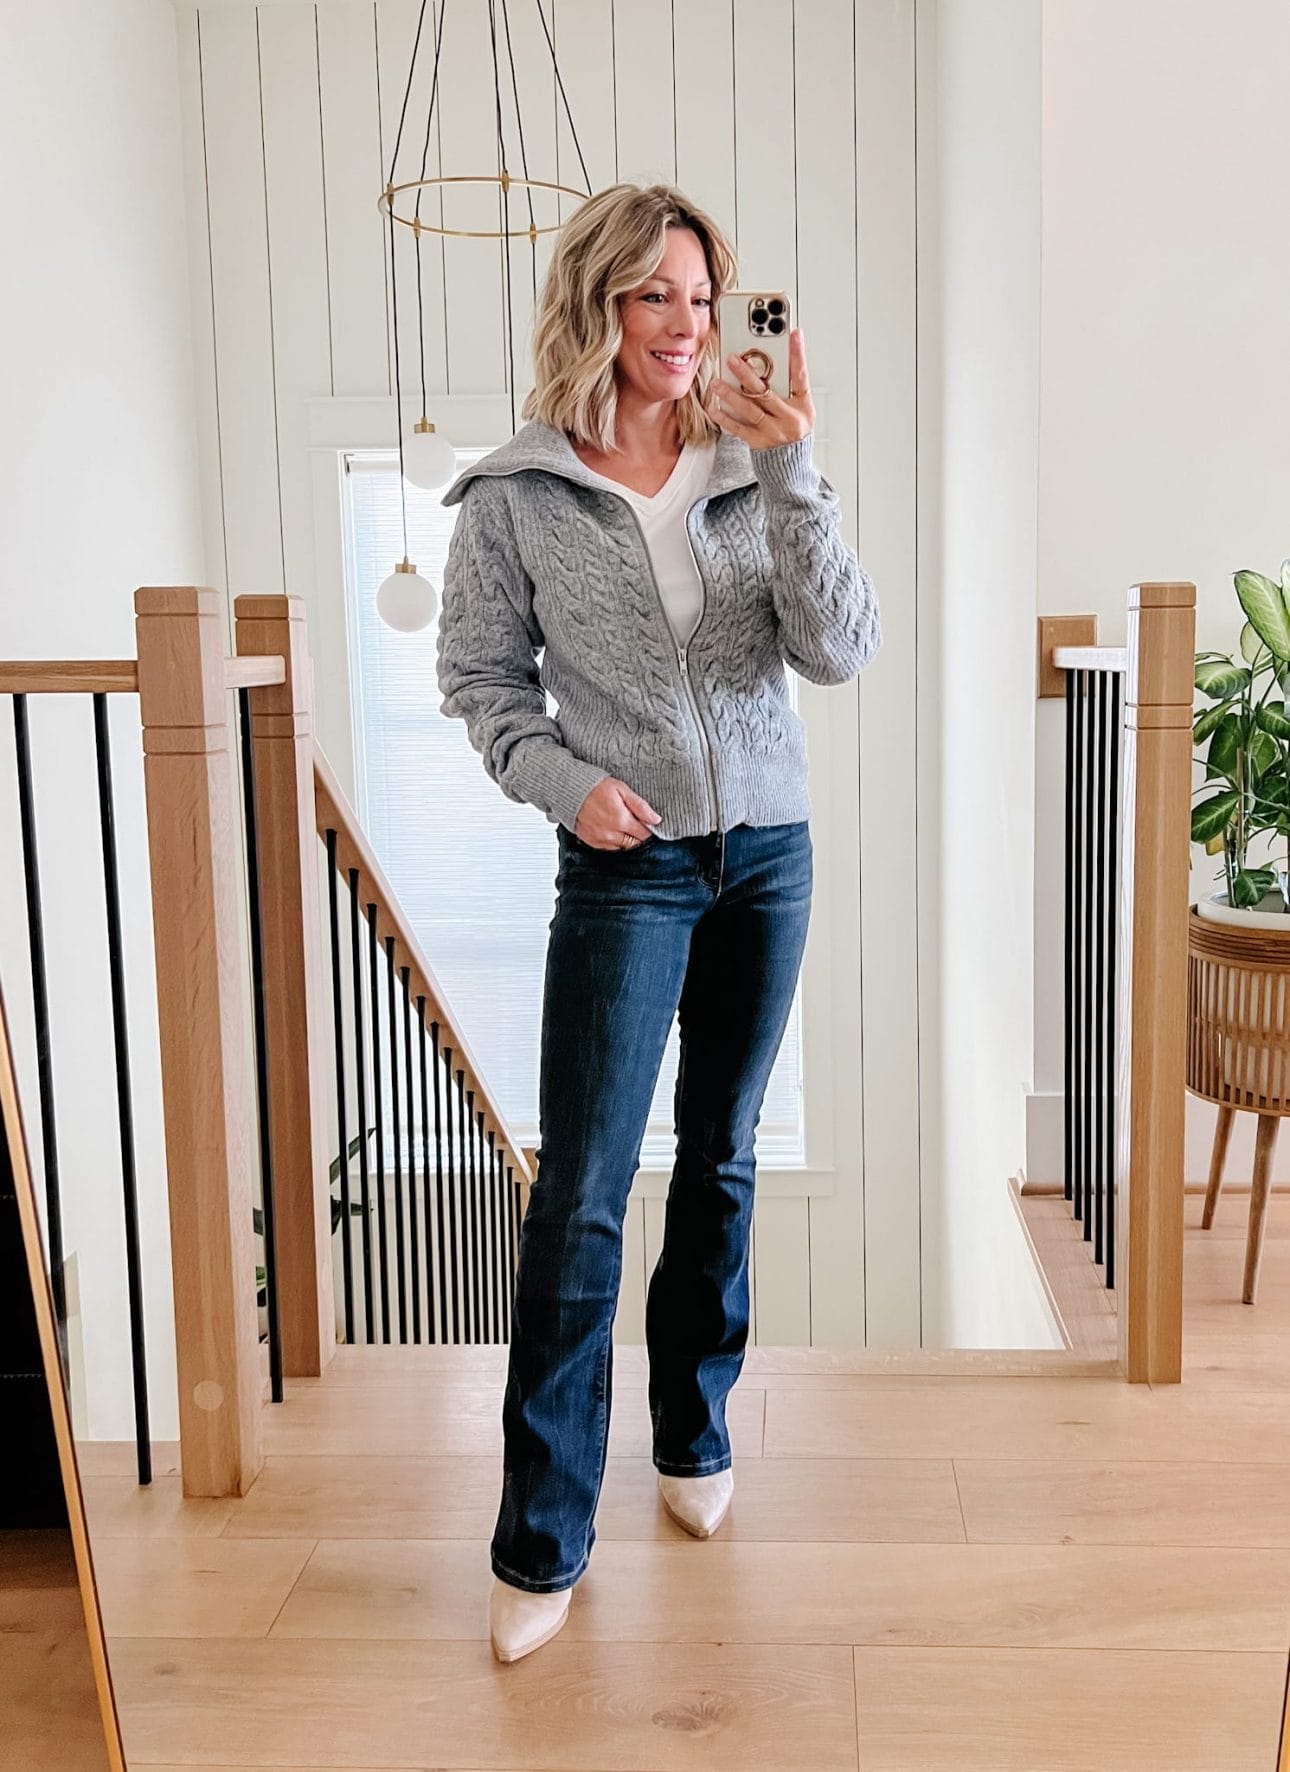 Walmart zip cardigan and jeans outfit